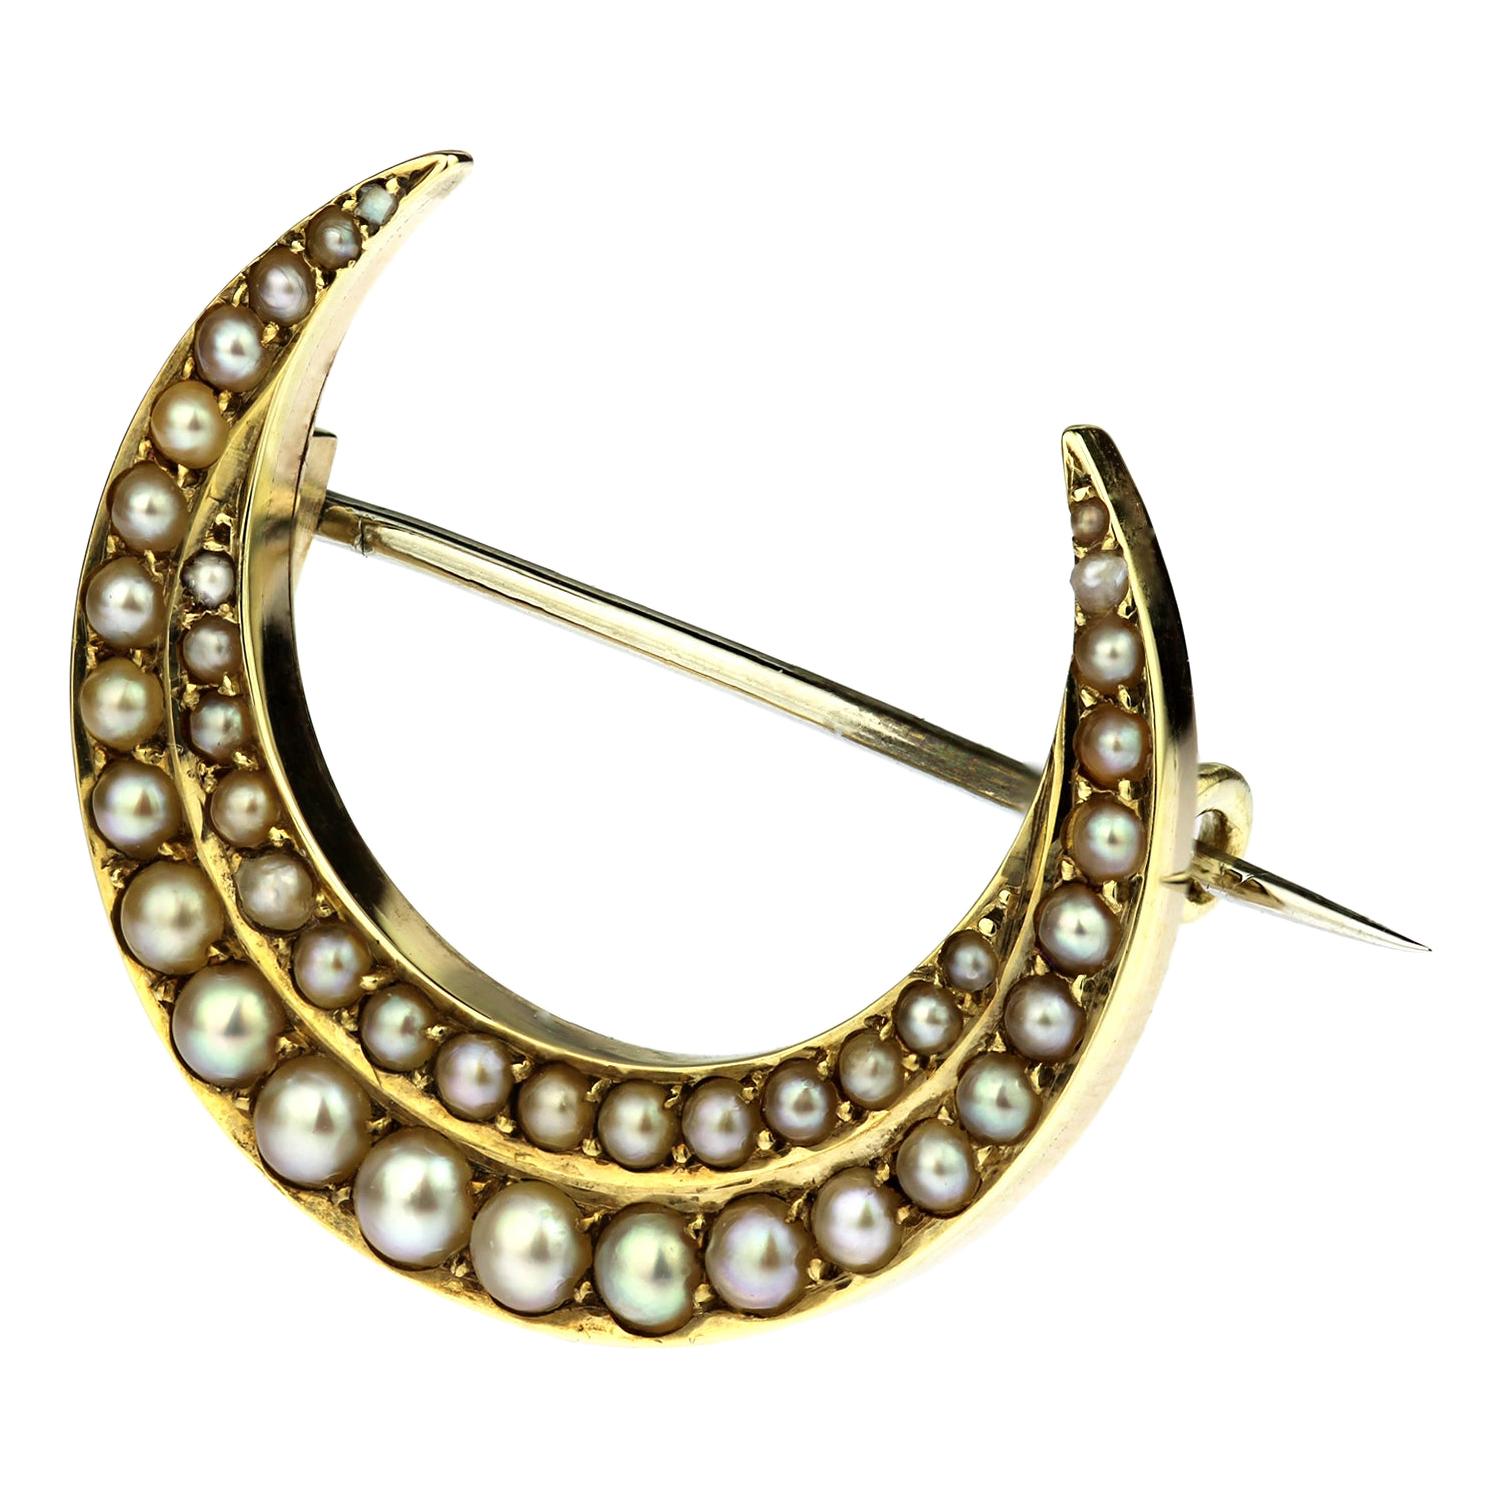 Antique Victorian Crescent Moon Brooch with Natural Pearls in 15 Karat Gold